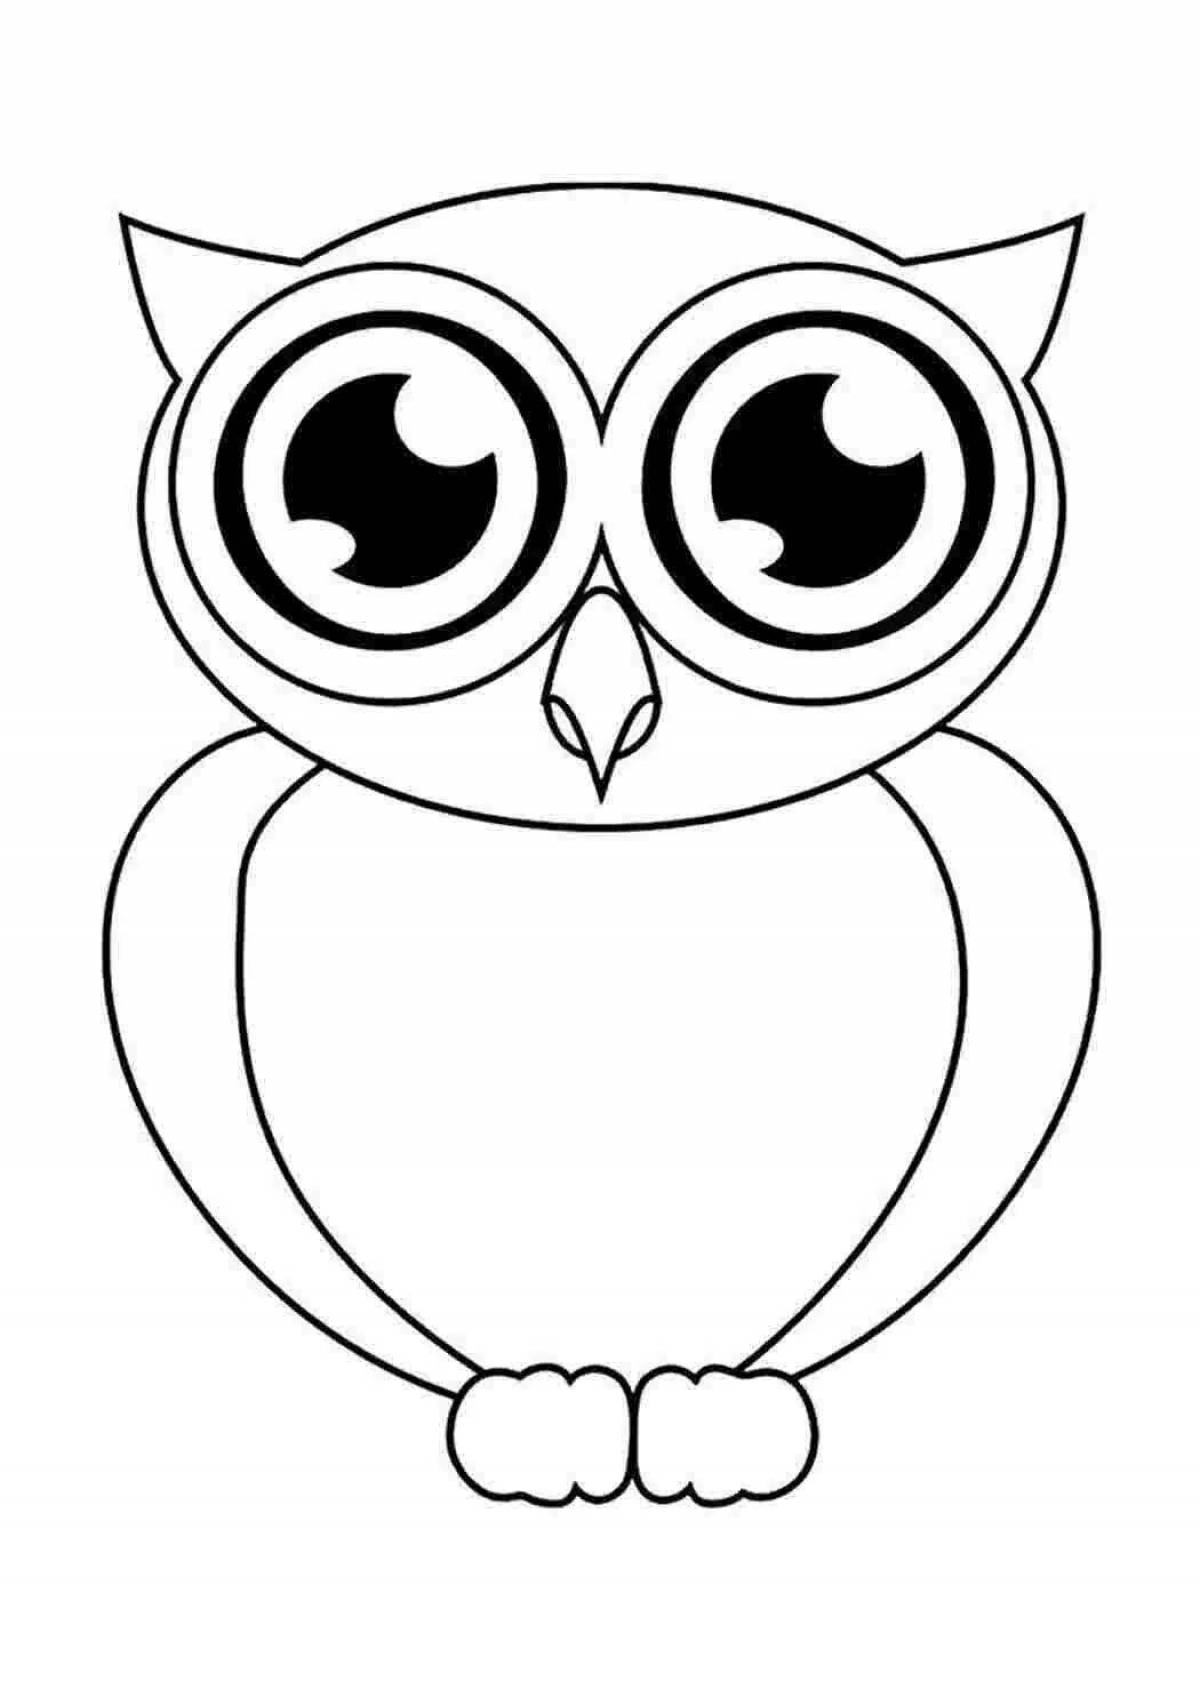 Fancy Owl coloring page